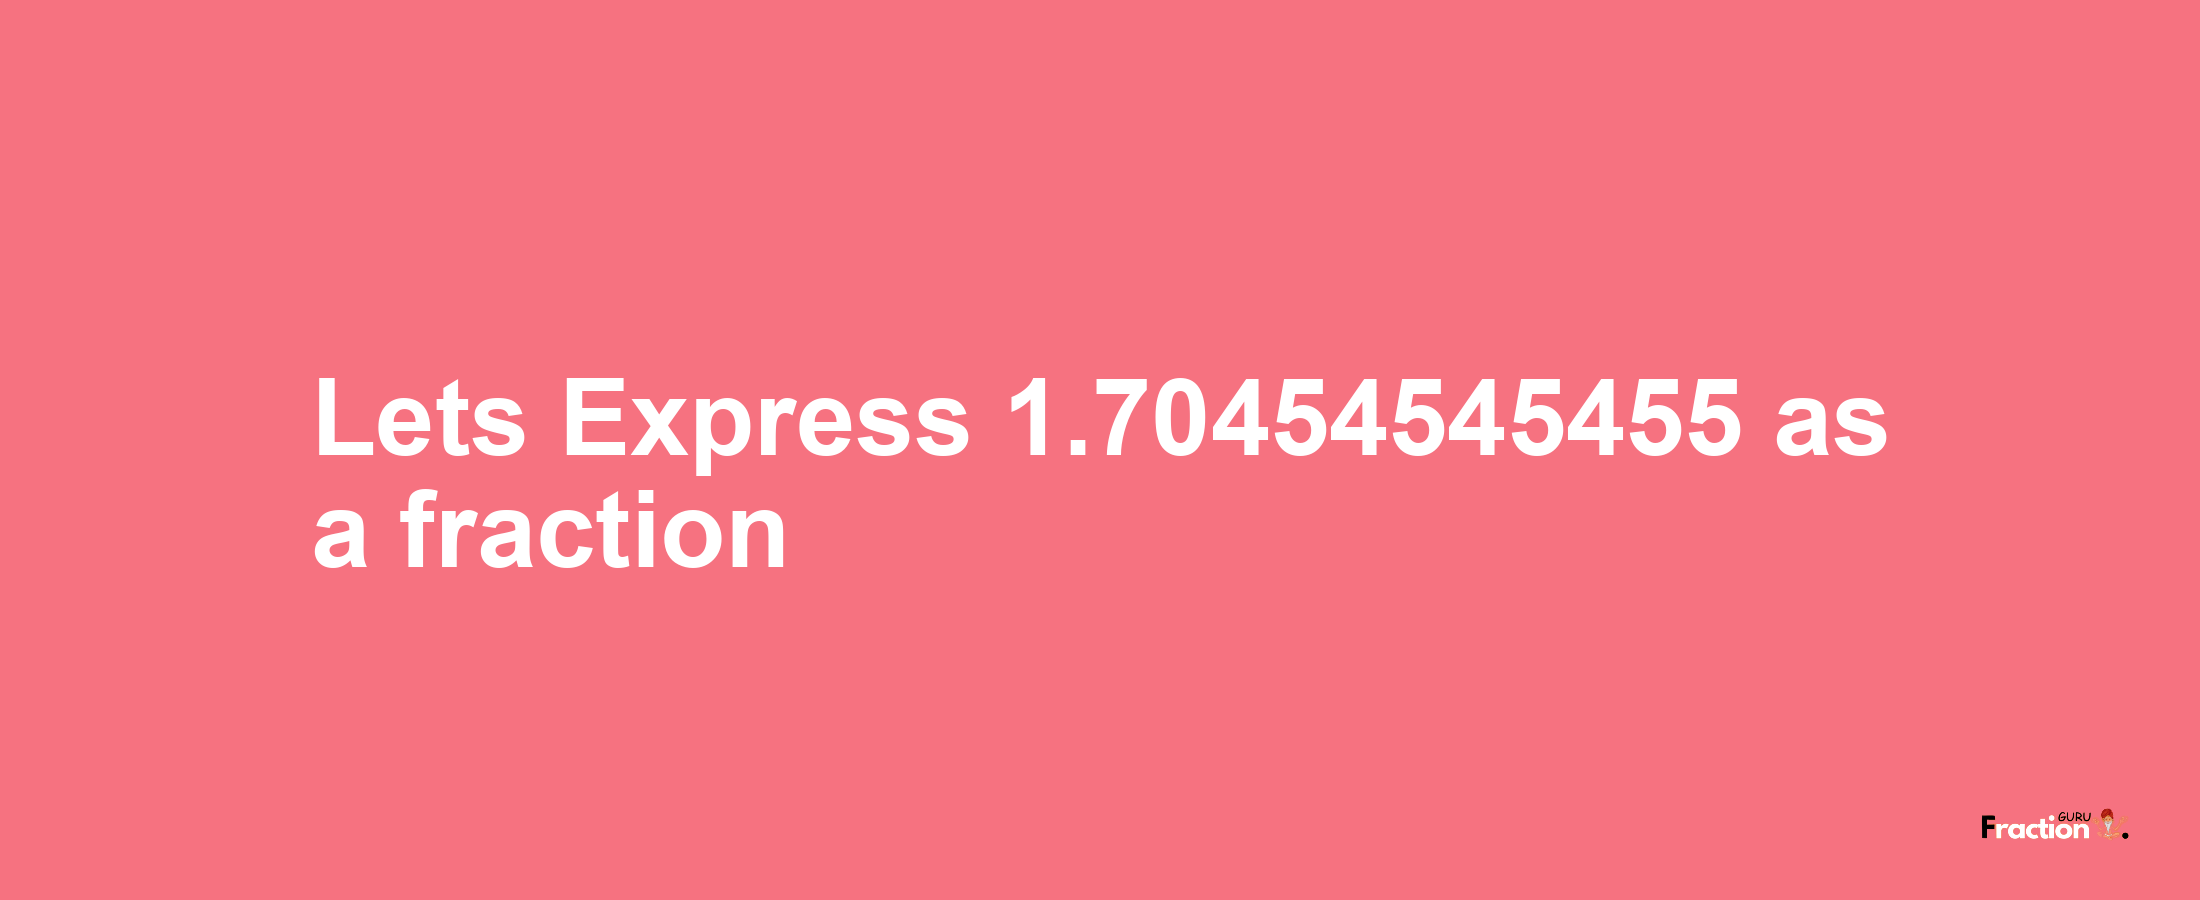 Lets Express 1.70454545455 as afraction